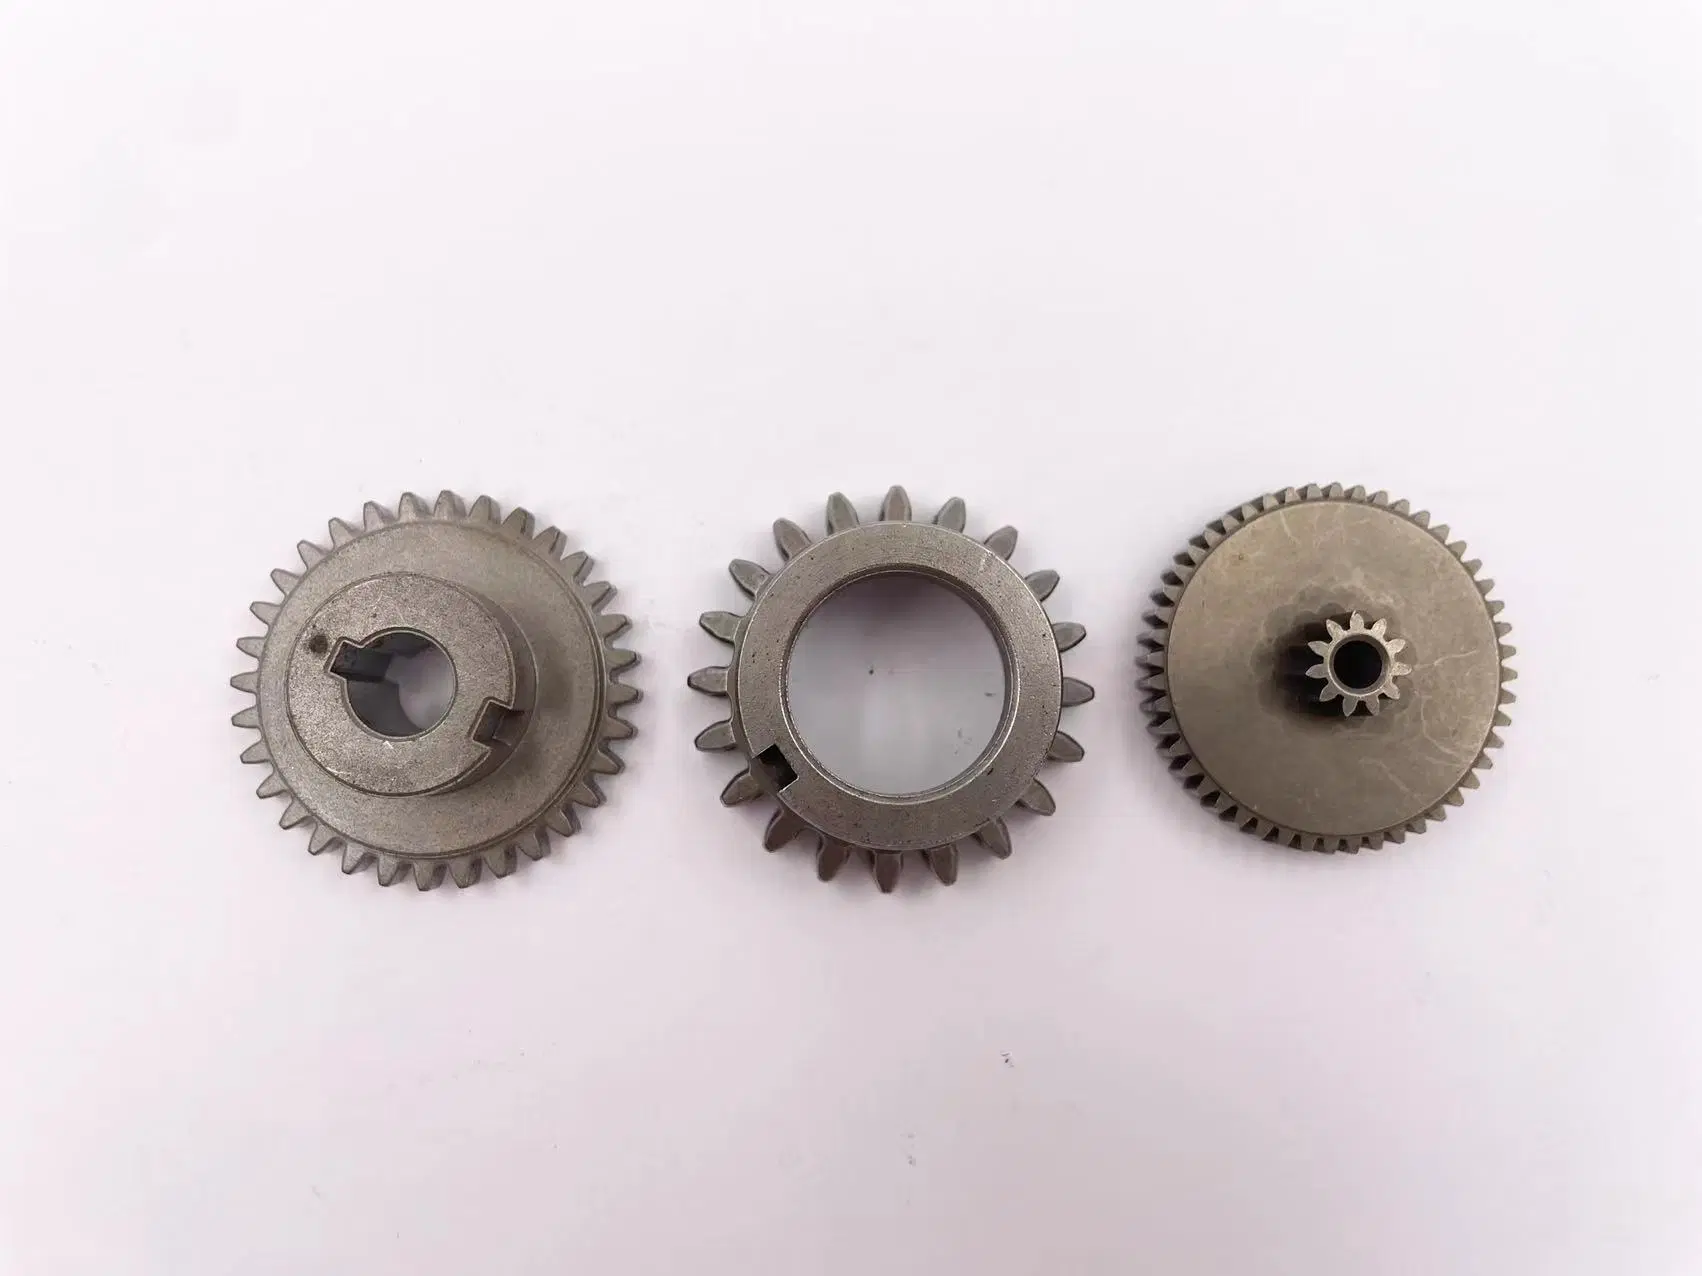 Hot Selling Low Cost MIM Powder Metallurgy Products Made by Metal Injection Molding Process Stainless Steel Gear Parts